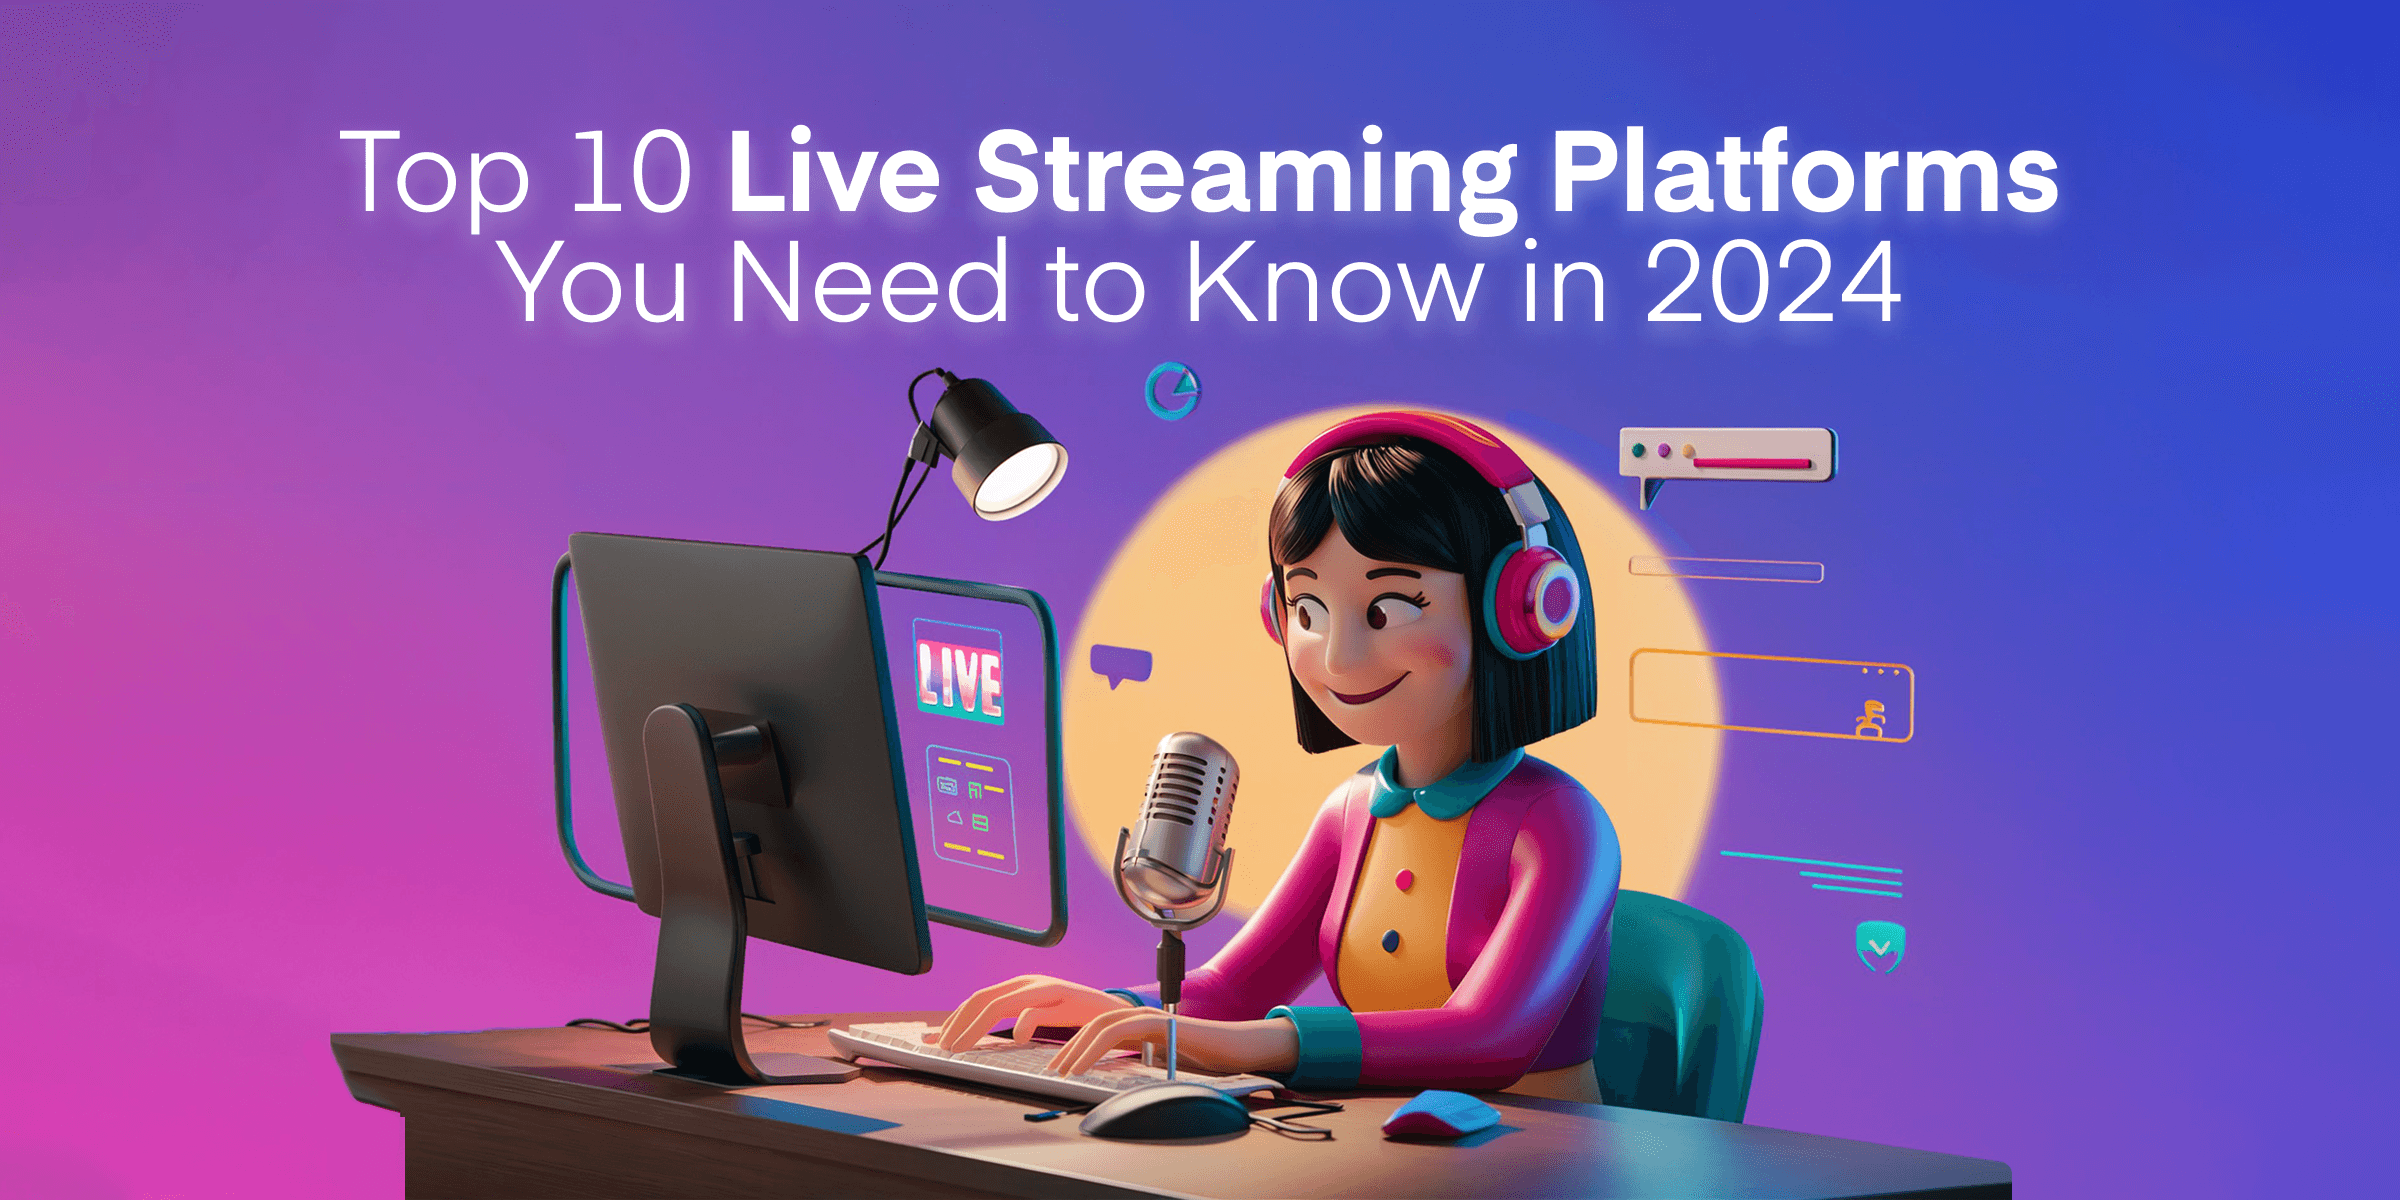 Top 10 Live Streaming Platforms You Need to Know in 2024